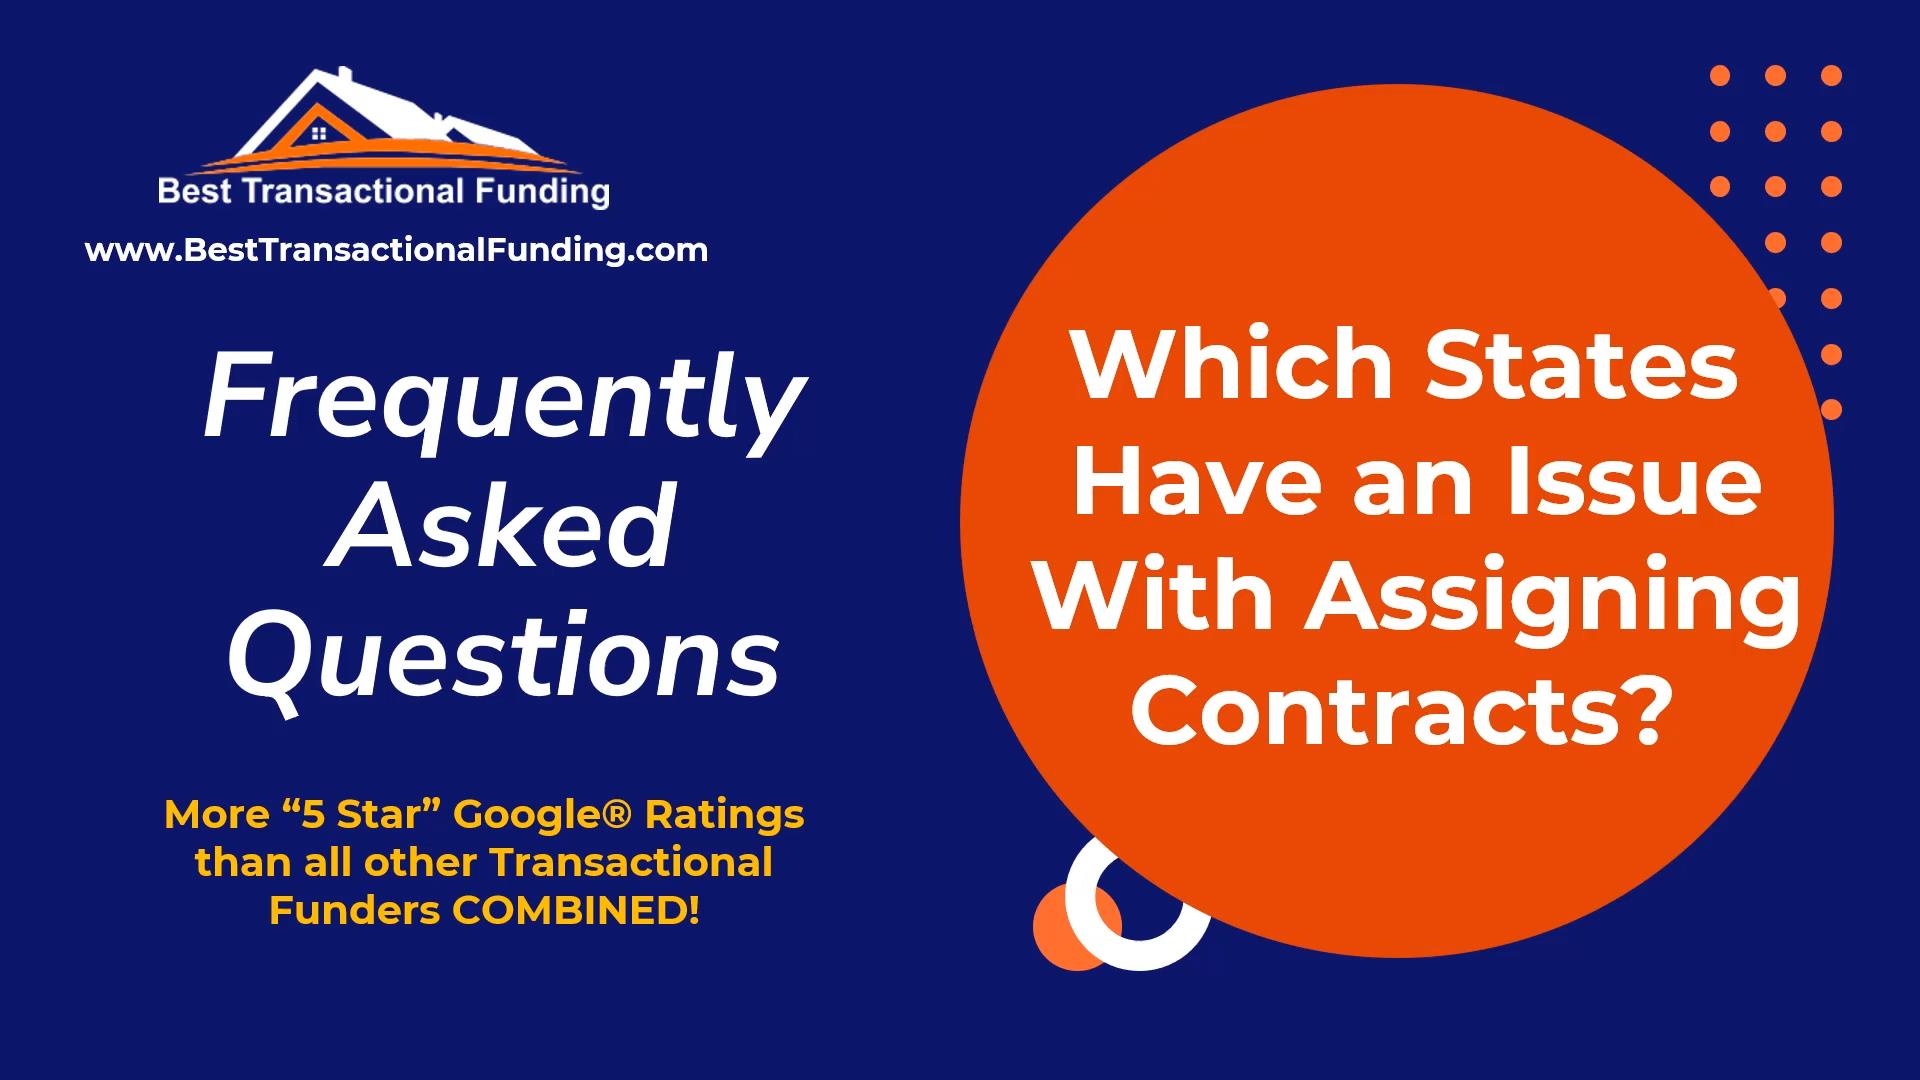 Problems with Assigning Contracts